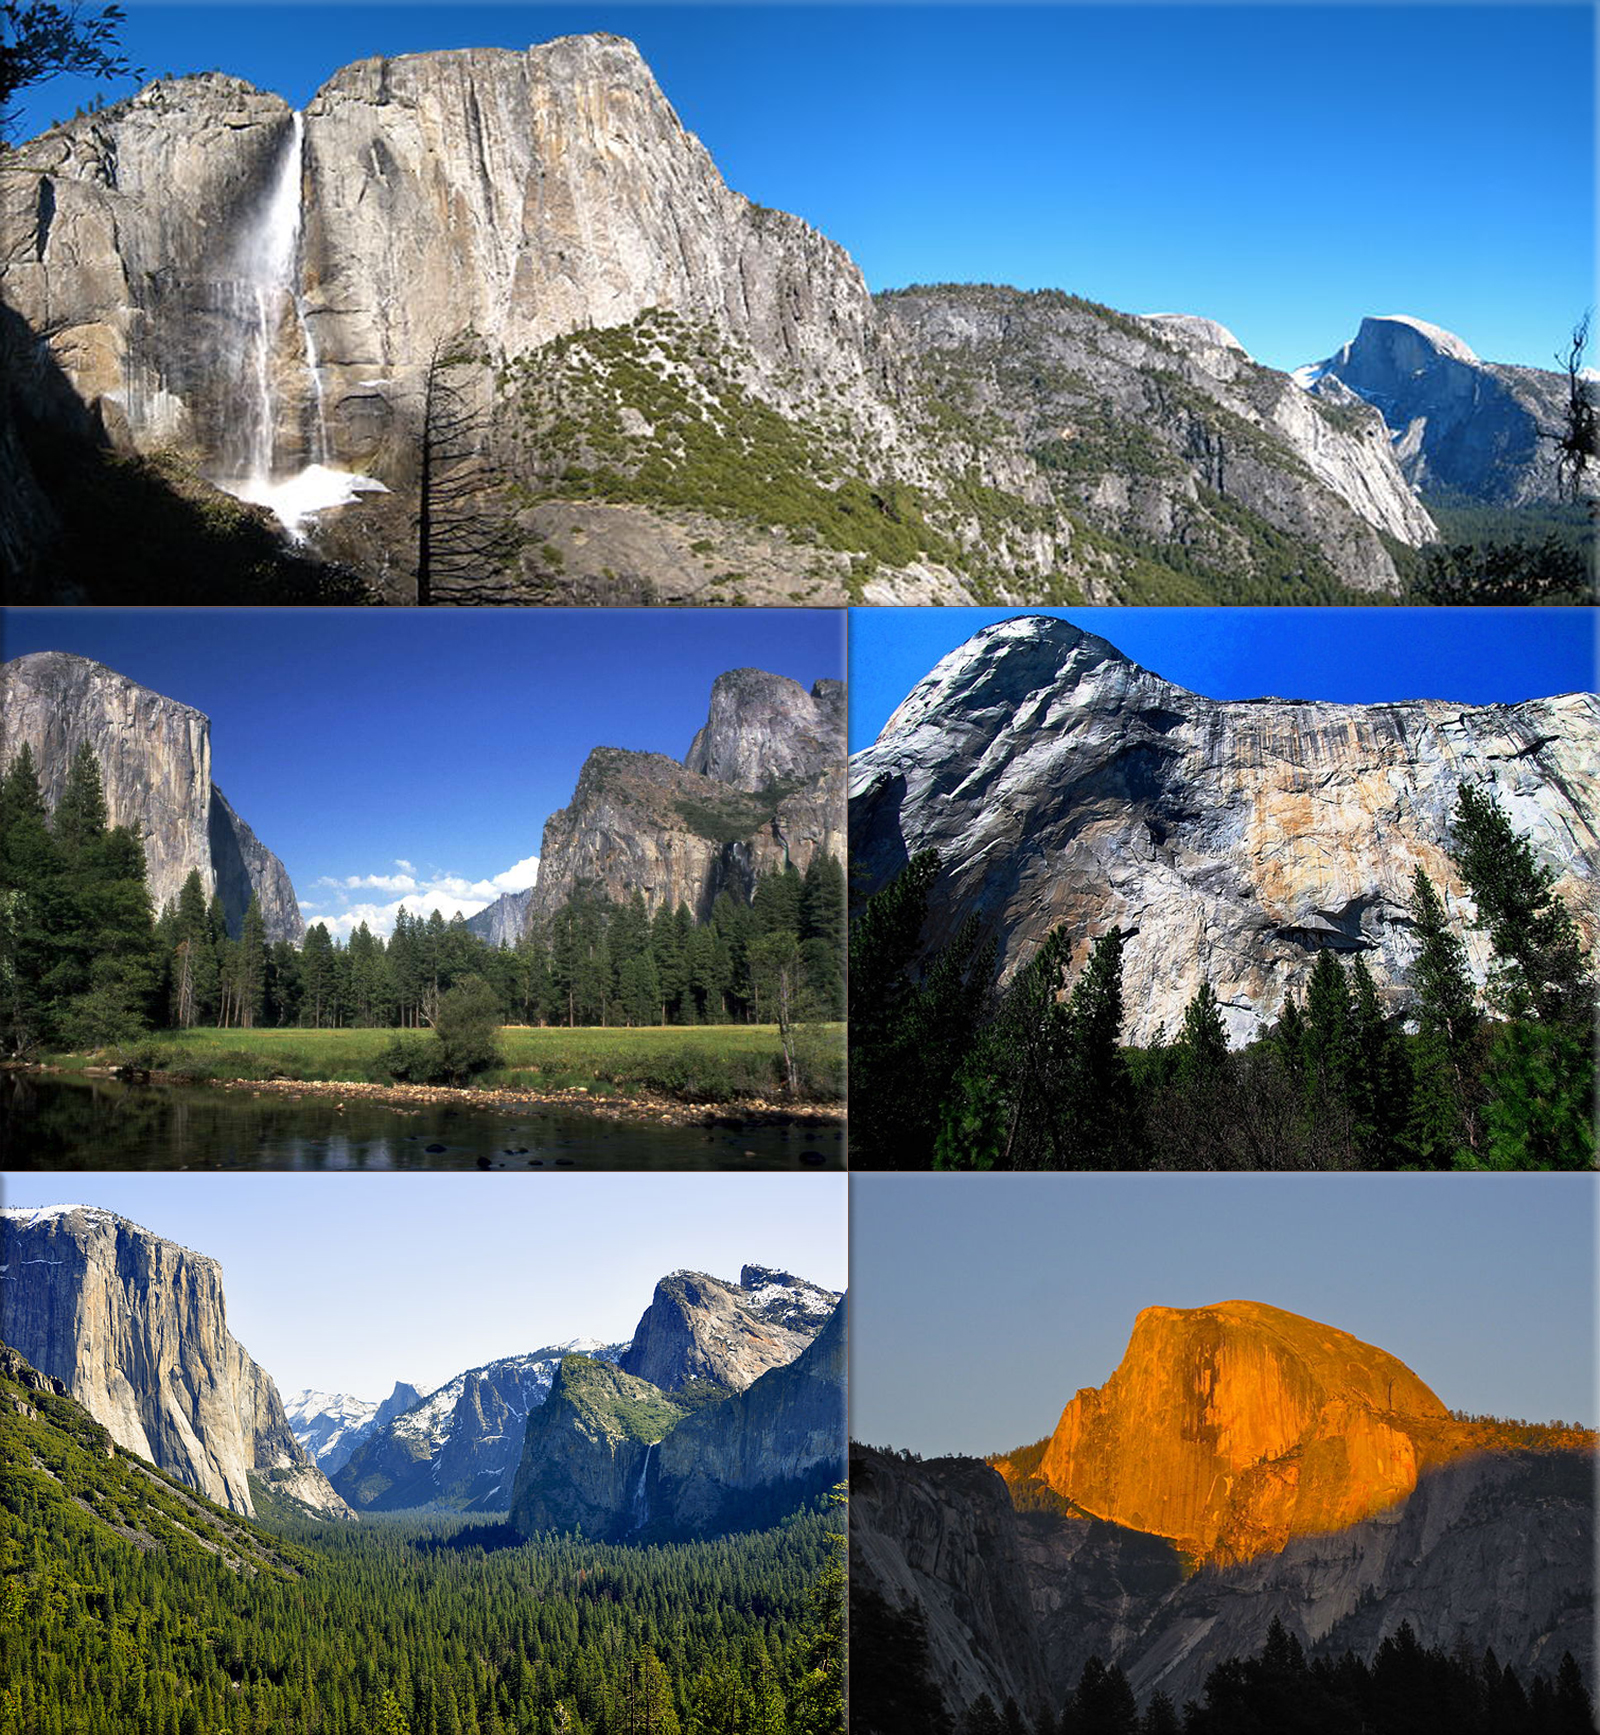 Yosemite National Park is established by the U.S. Congress